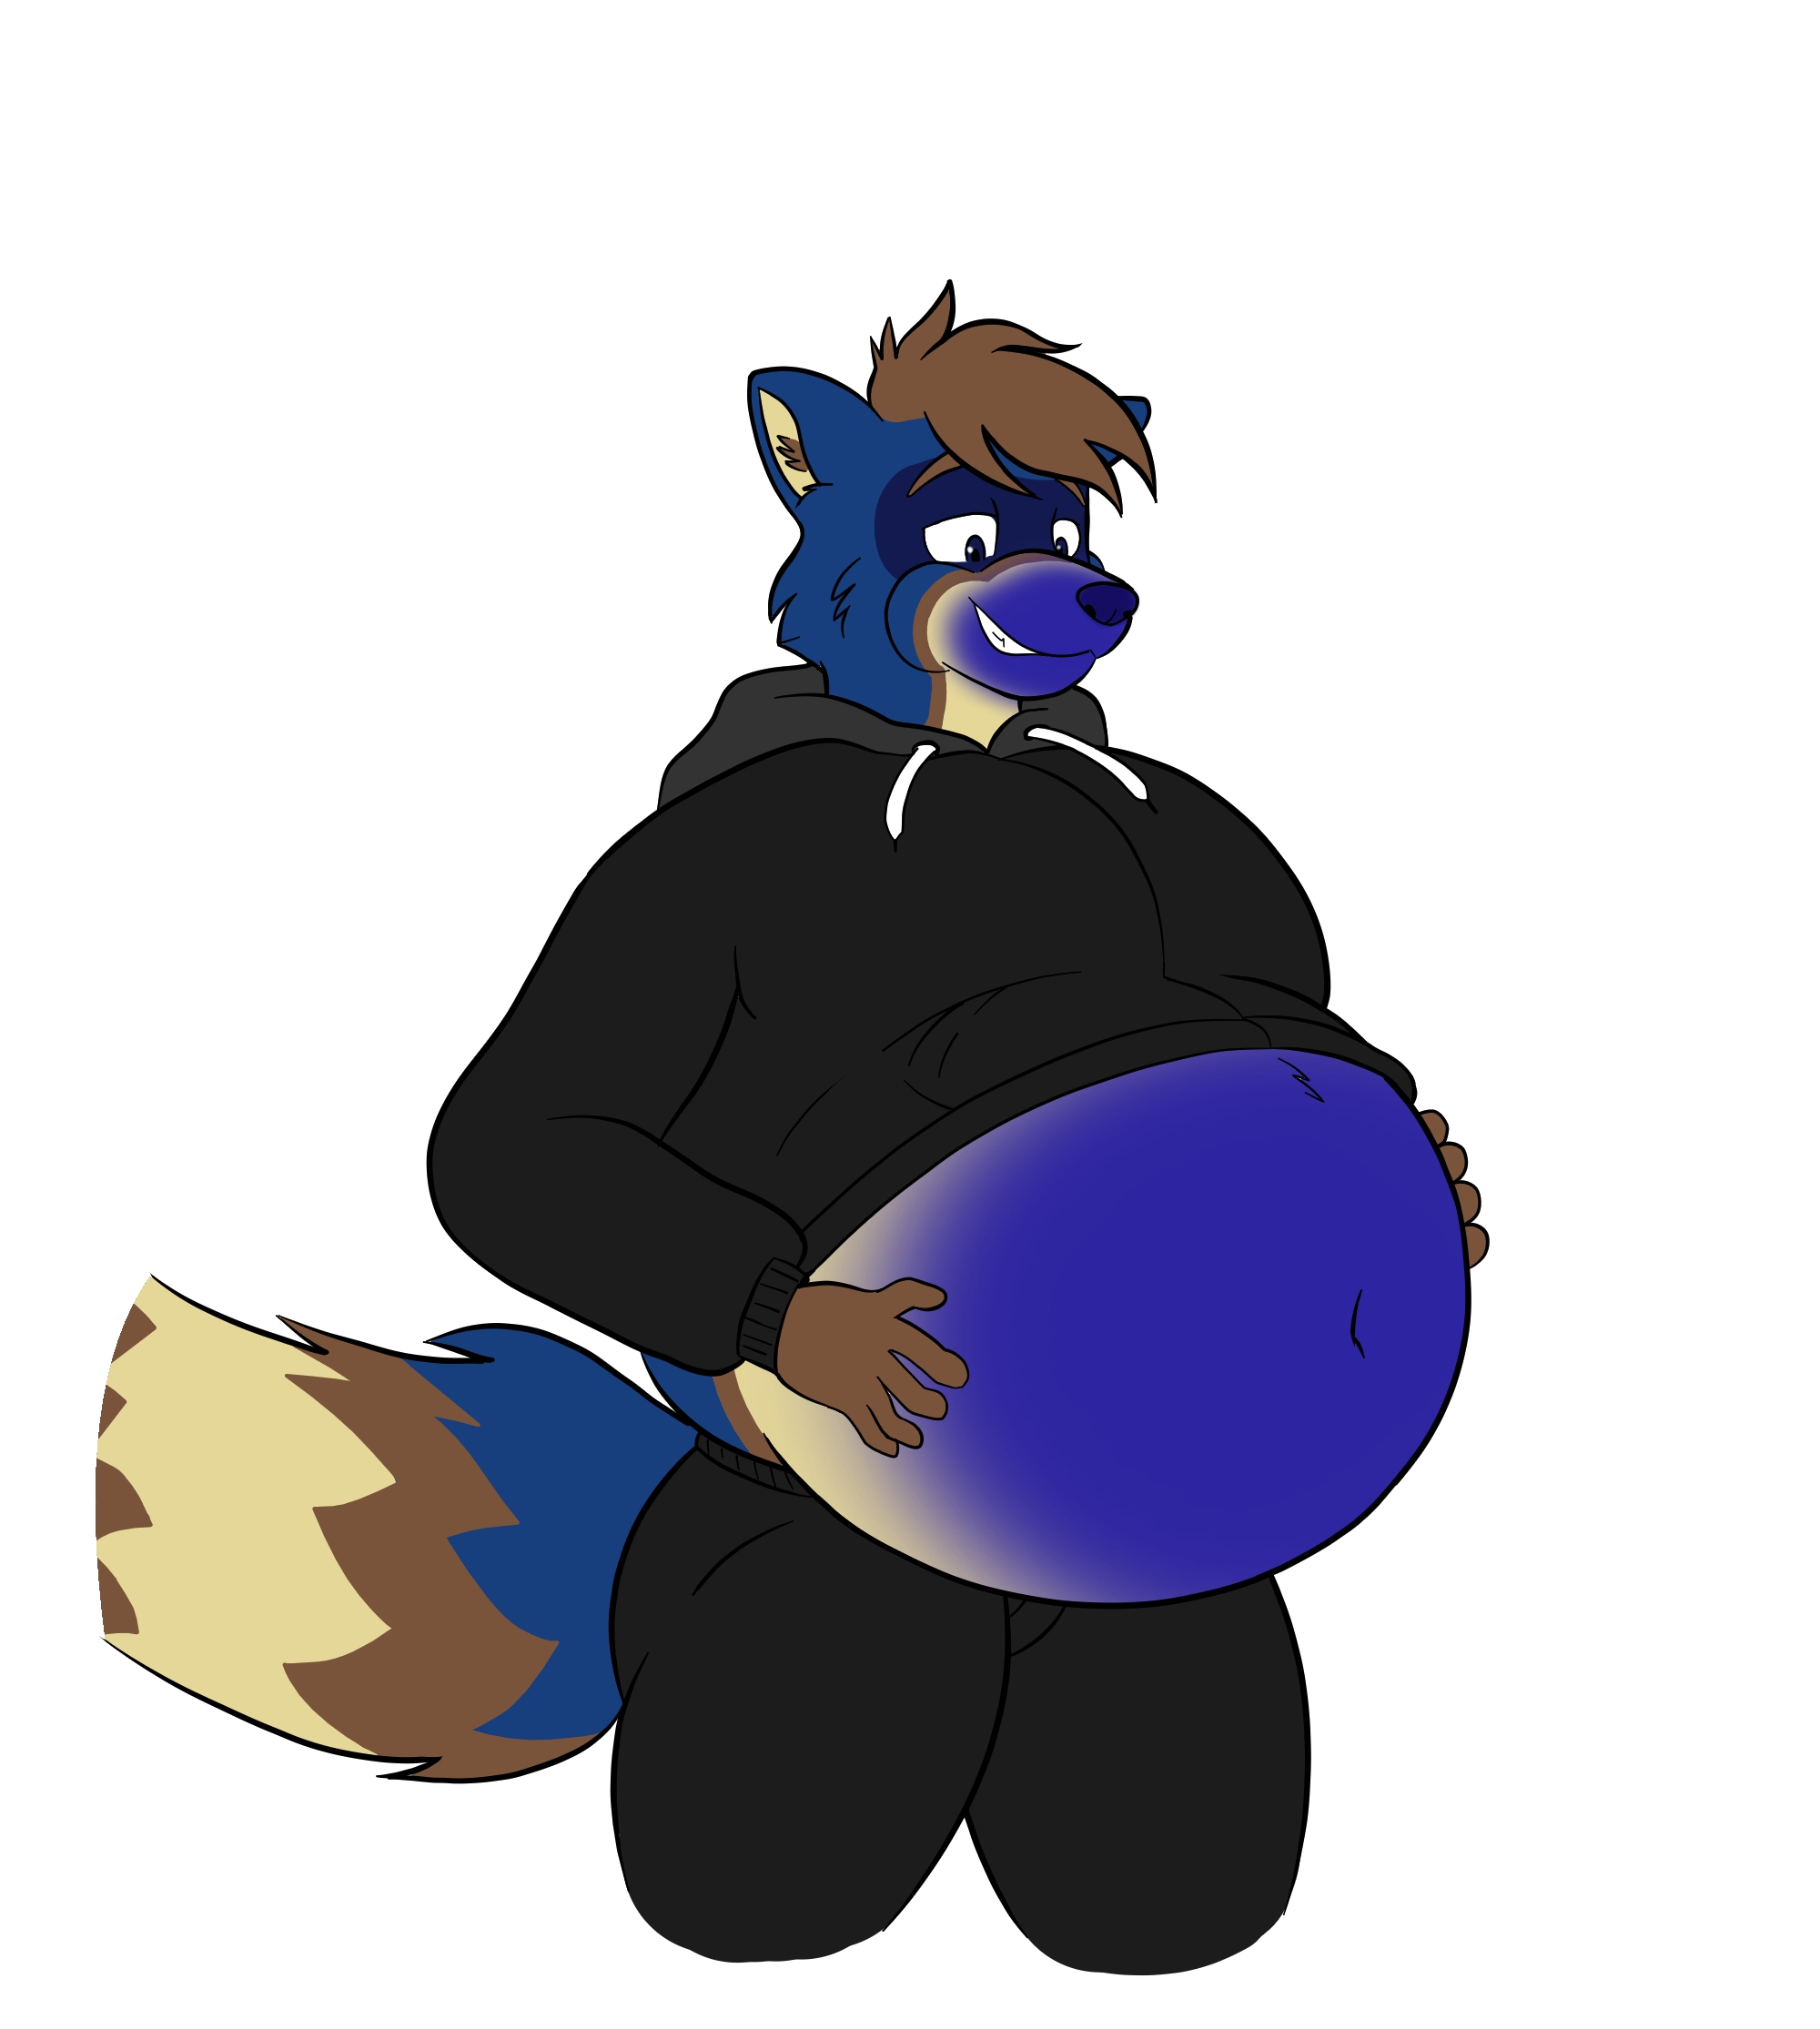 Male blueberry - Male blueberry inflation drawings